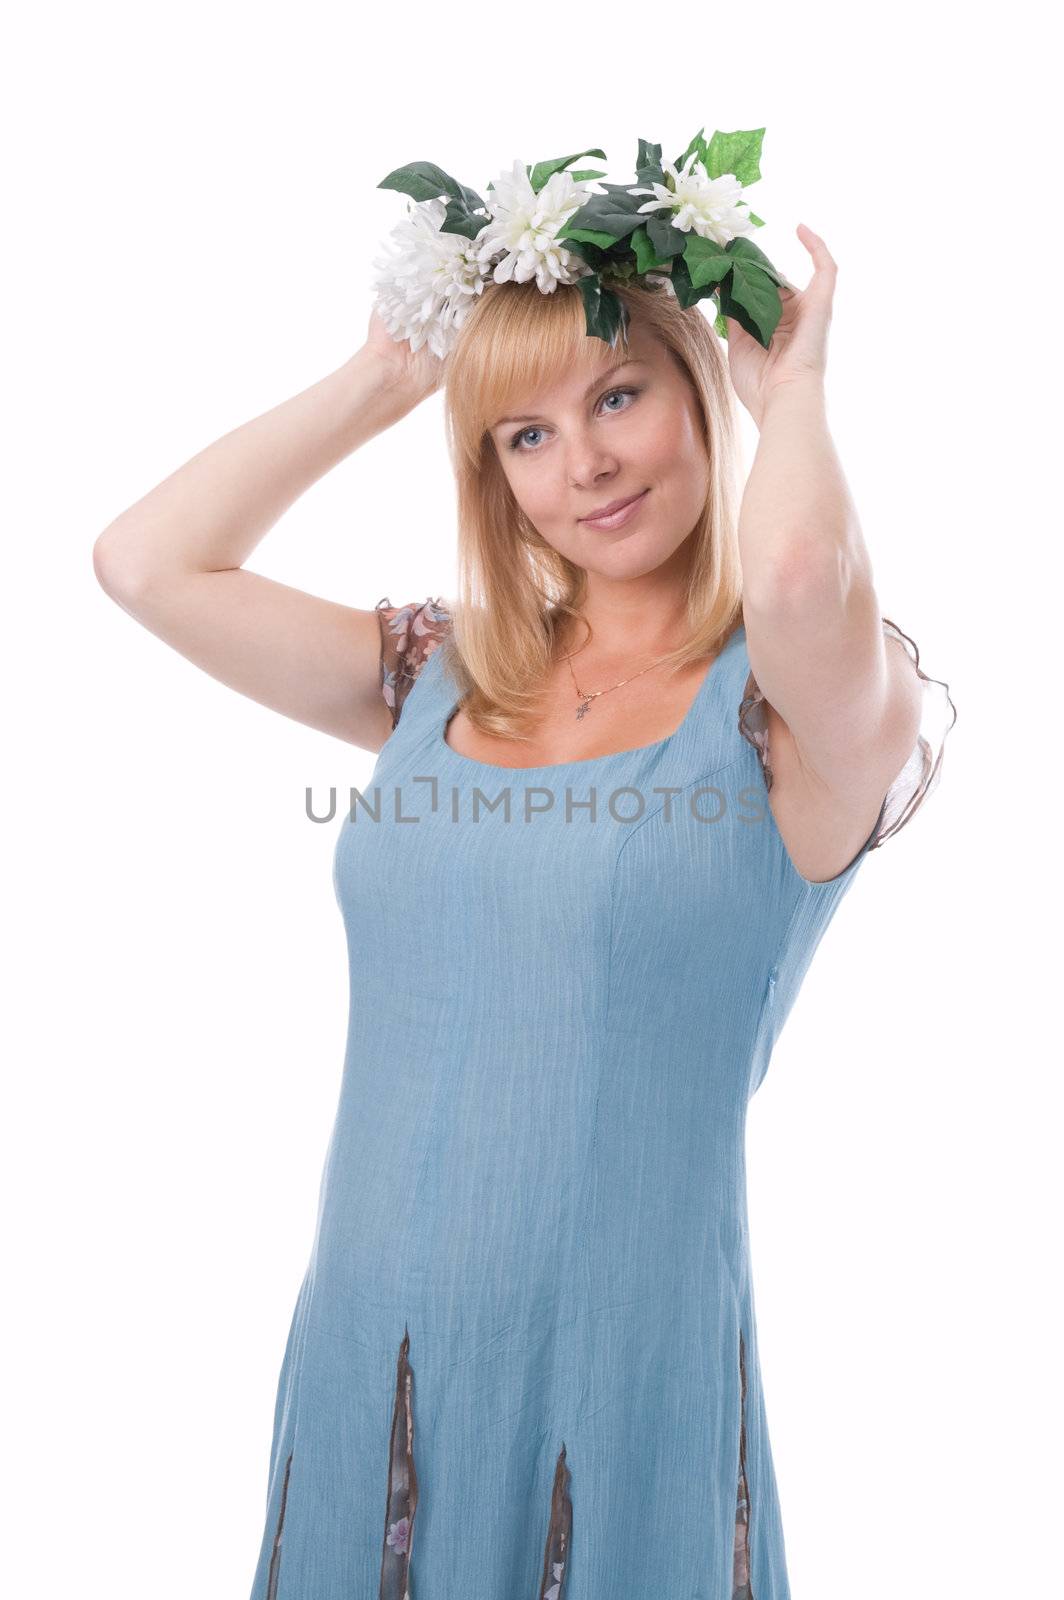 The attractive pregnant woman with a wreath of flowers